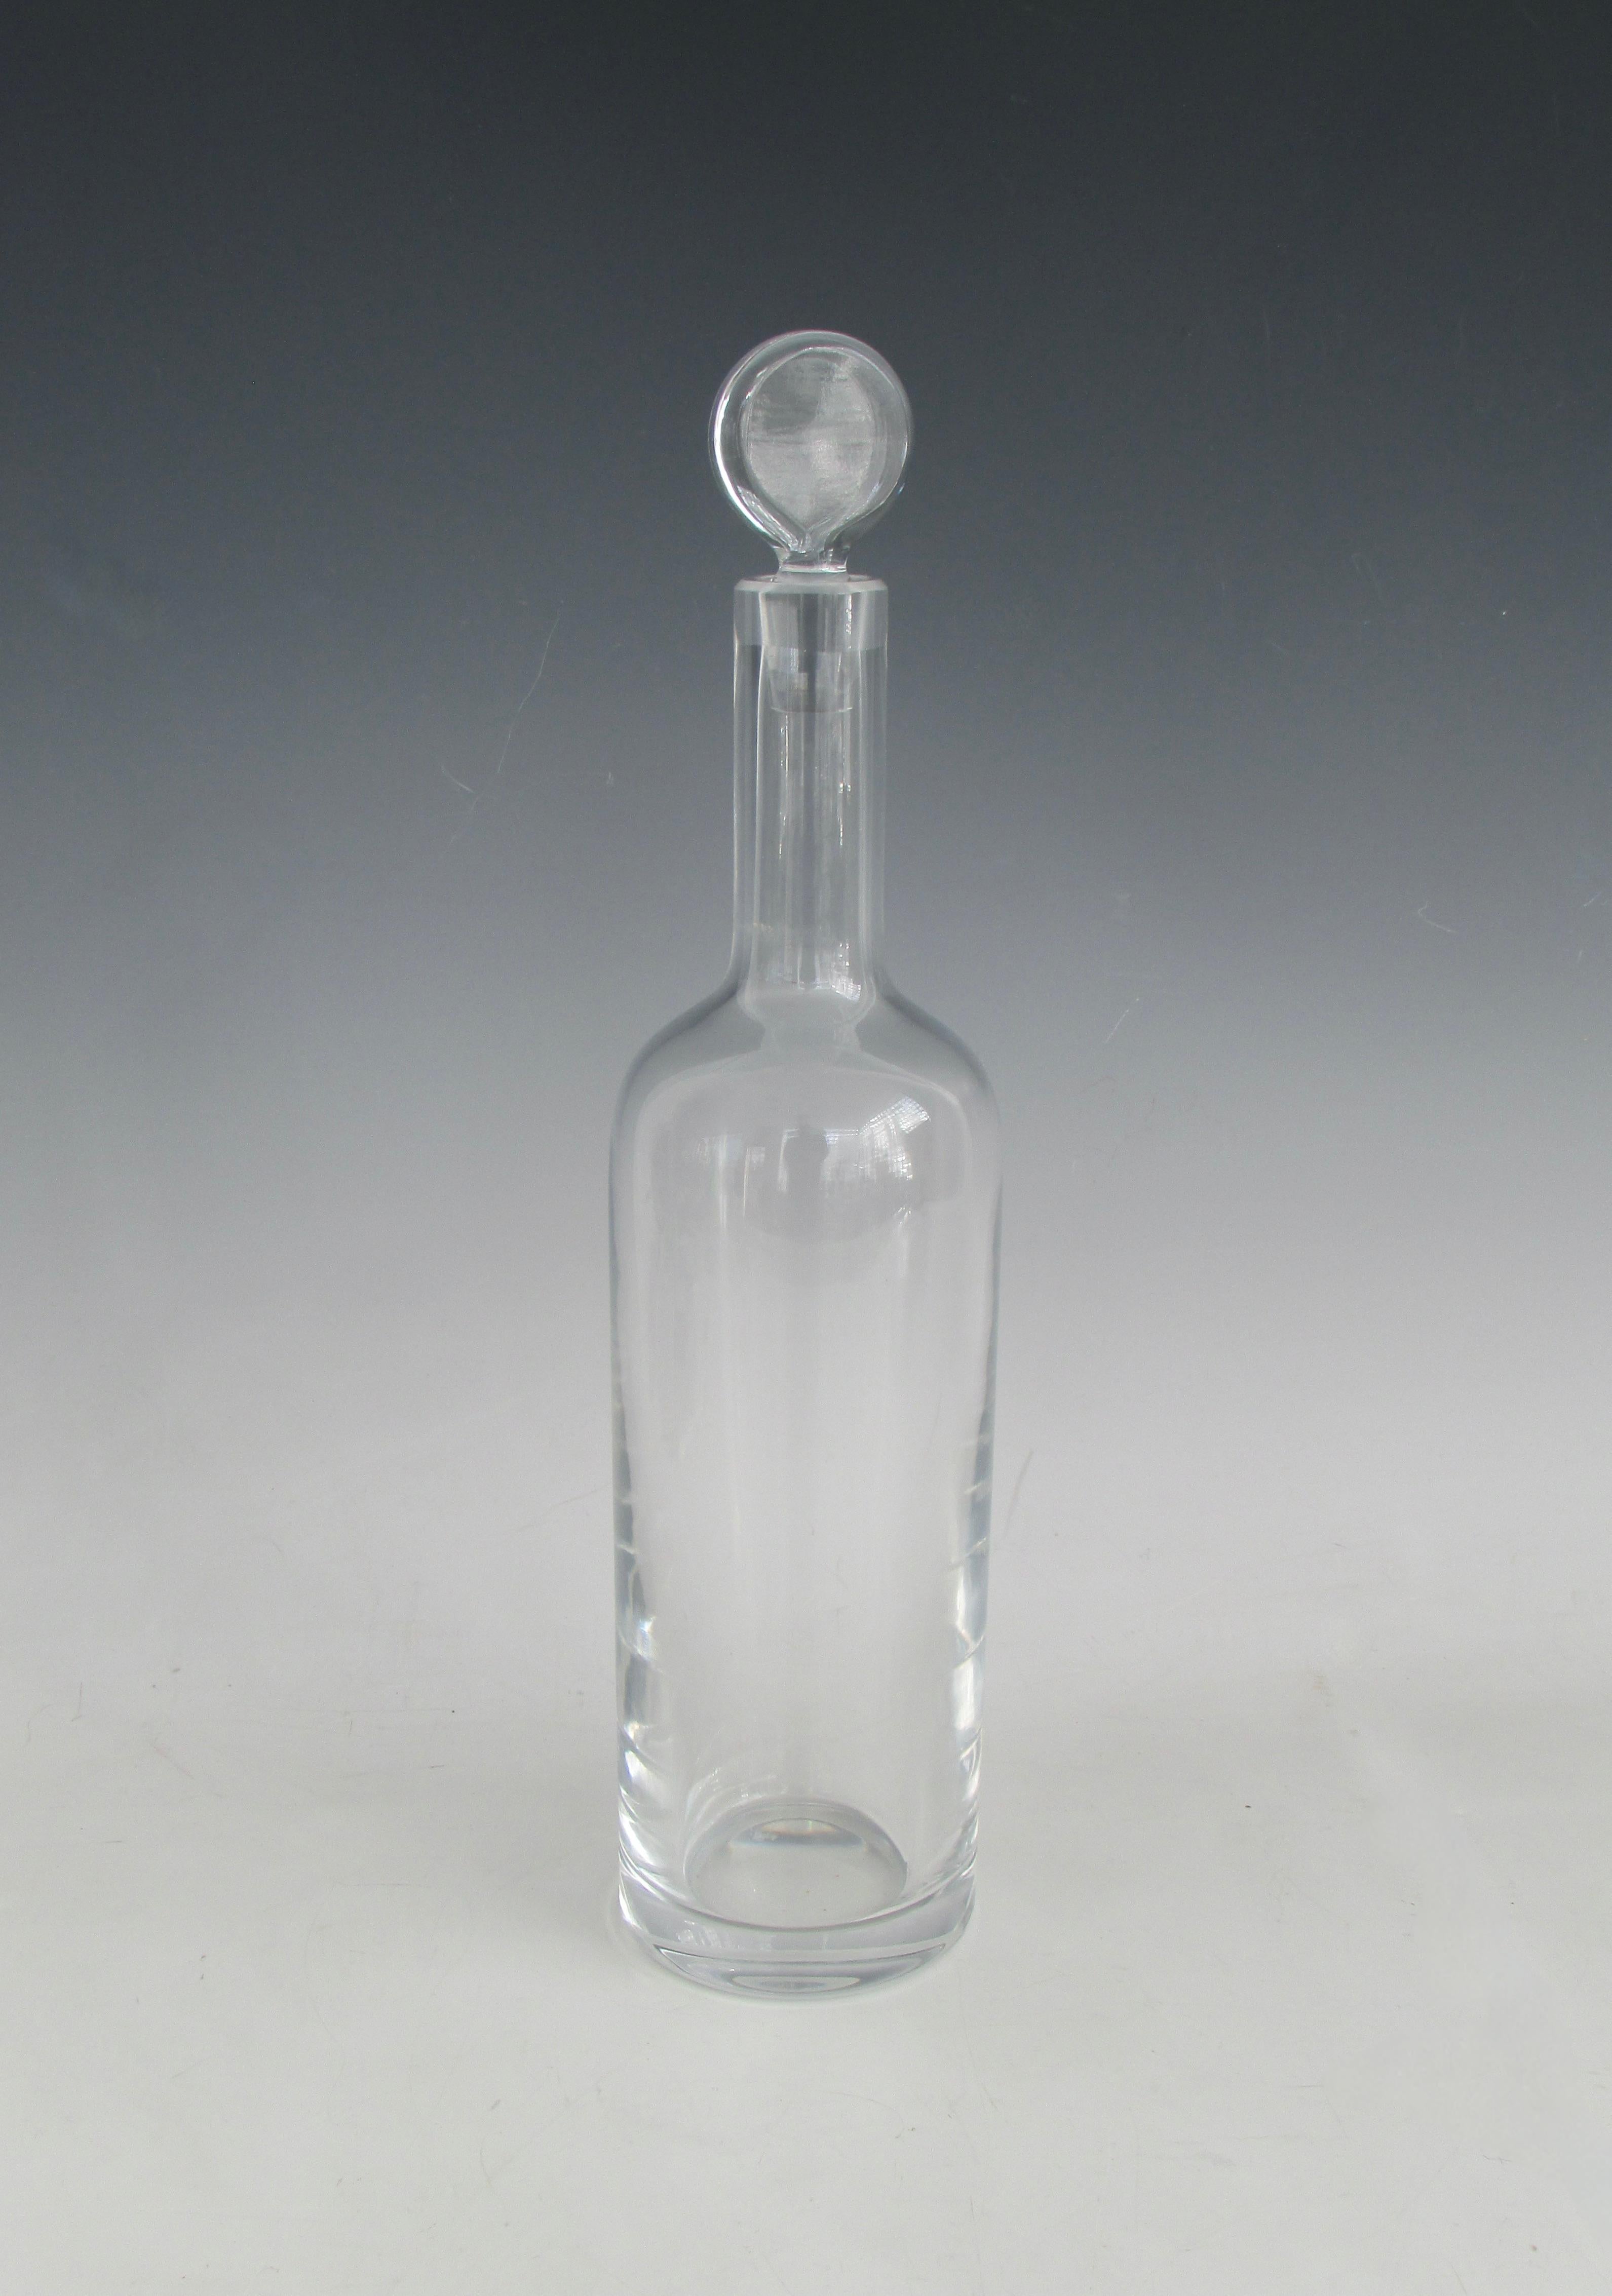 Elegant and simple lead crystal clear glass decanter. Produced by and acid etched Baccarat France. Fine condition.